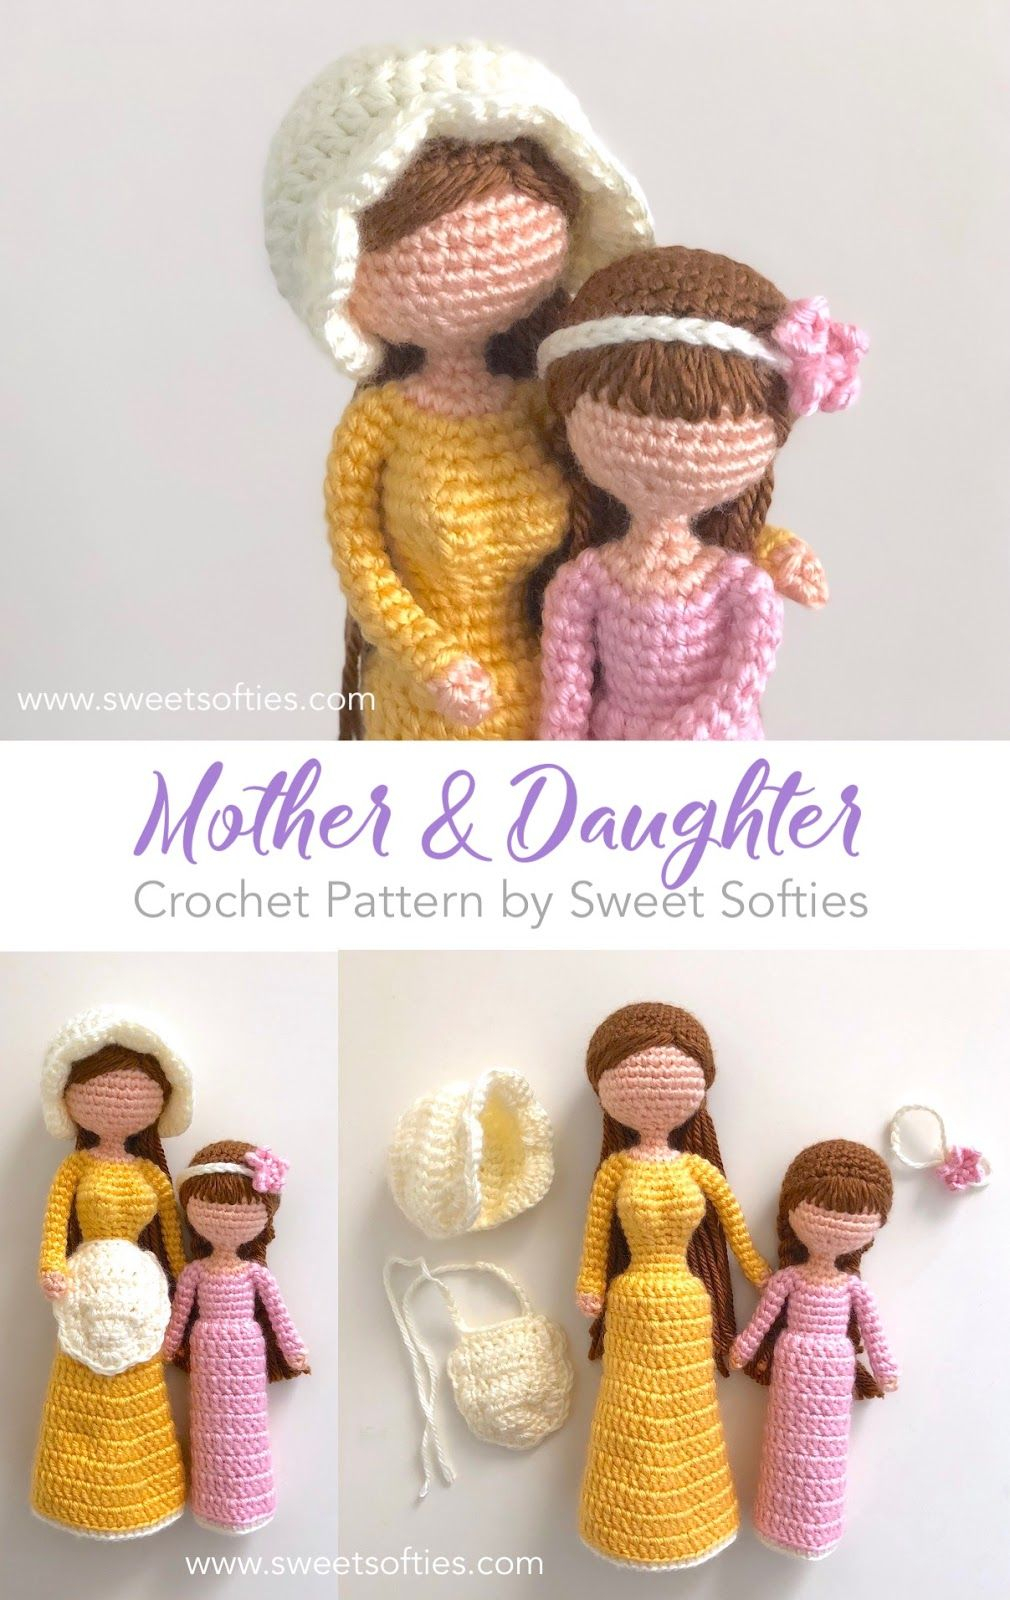 Simple Crochet Doll Pattern Mother Daughter Dolls Inspired Willow Tree Figurines